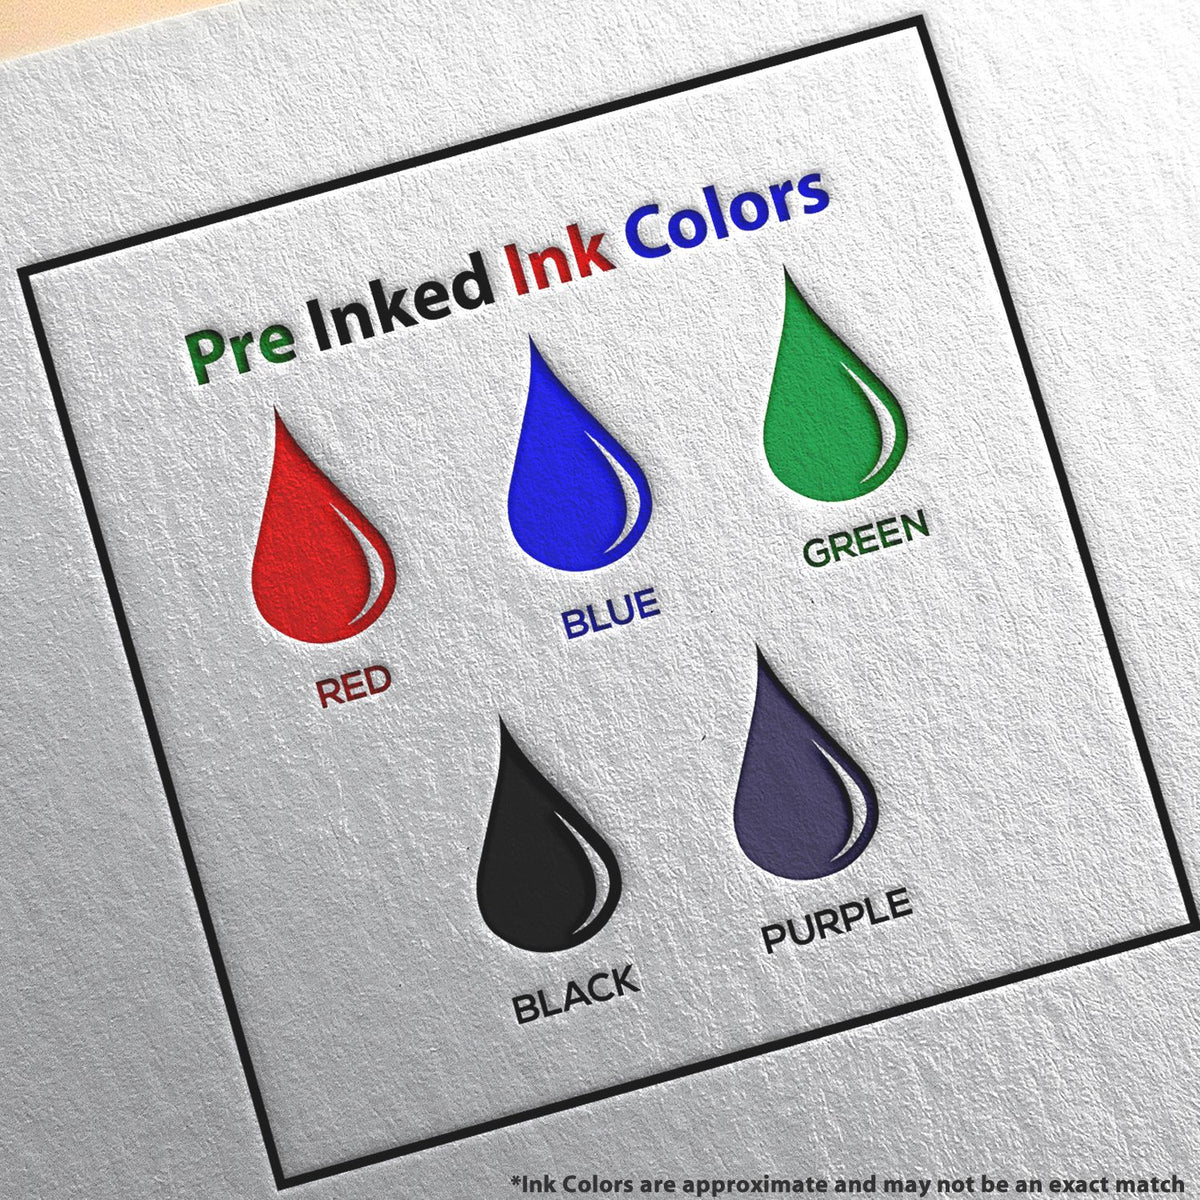 A picture showing the different ink colors or hues available for the Slim Pre-Inked Florida Landscape Architect Seal Stamp product.